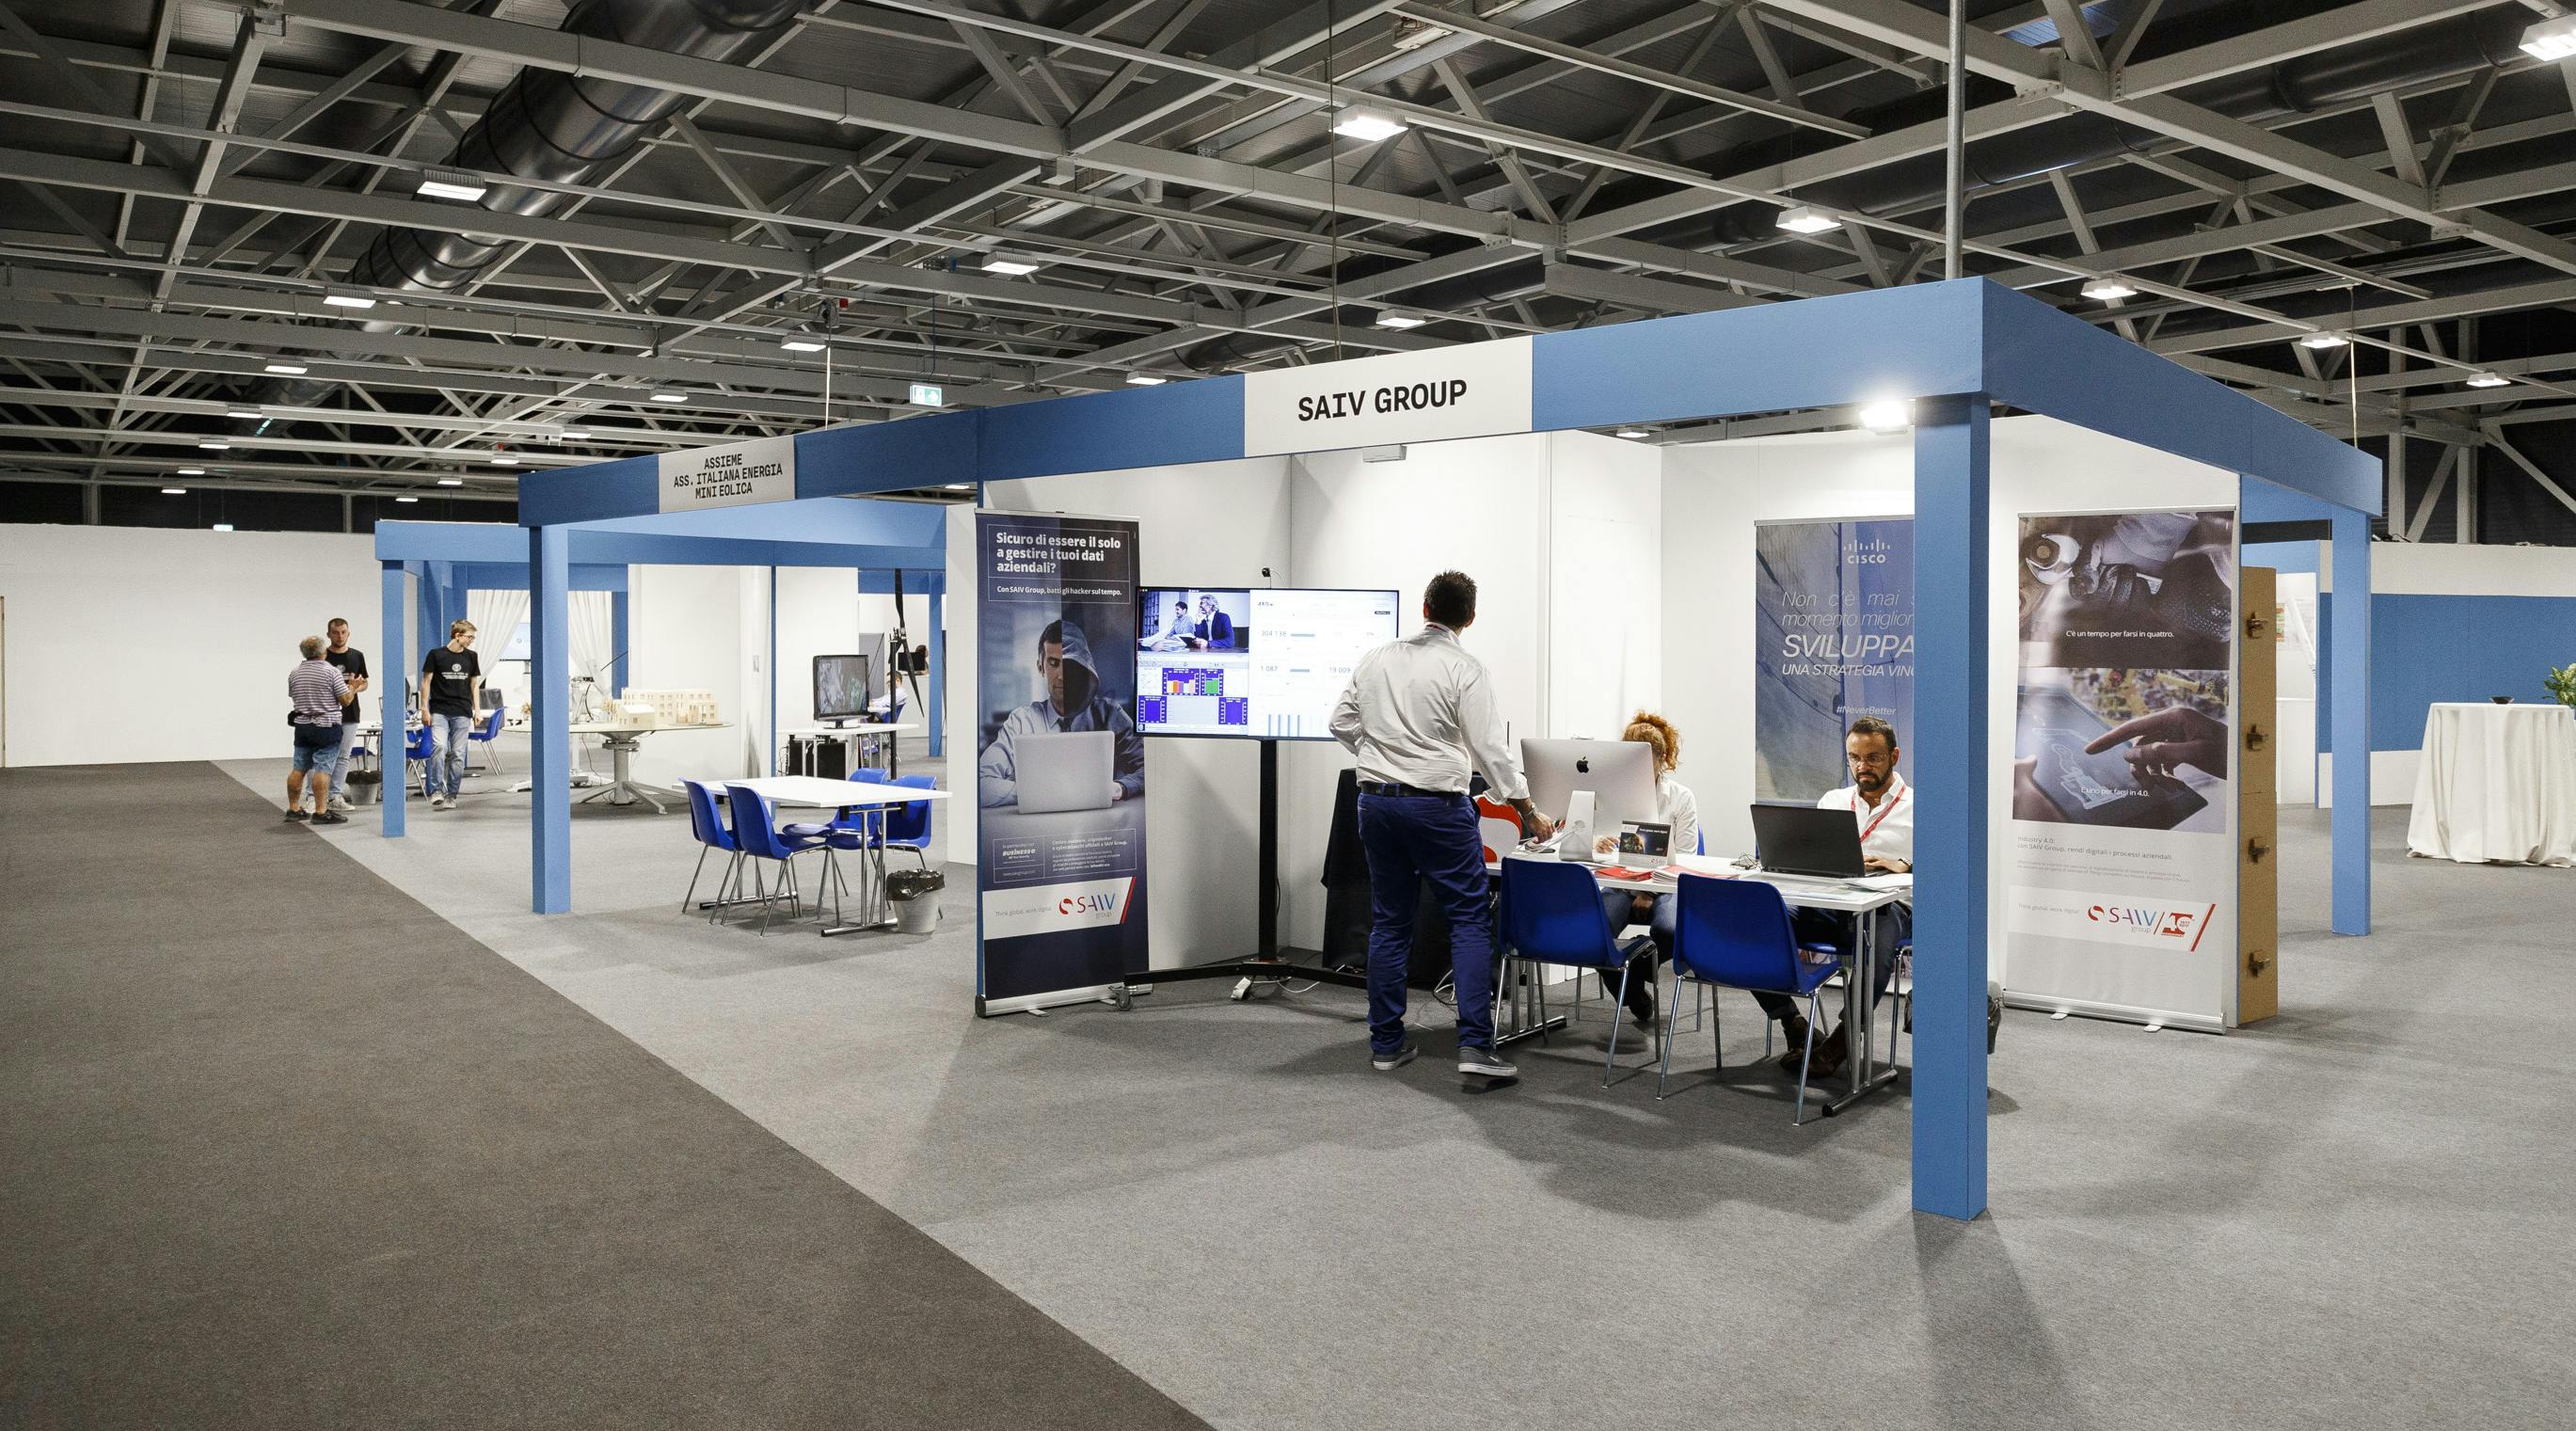 Exhibition hall with stand